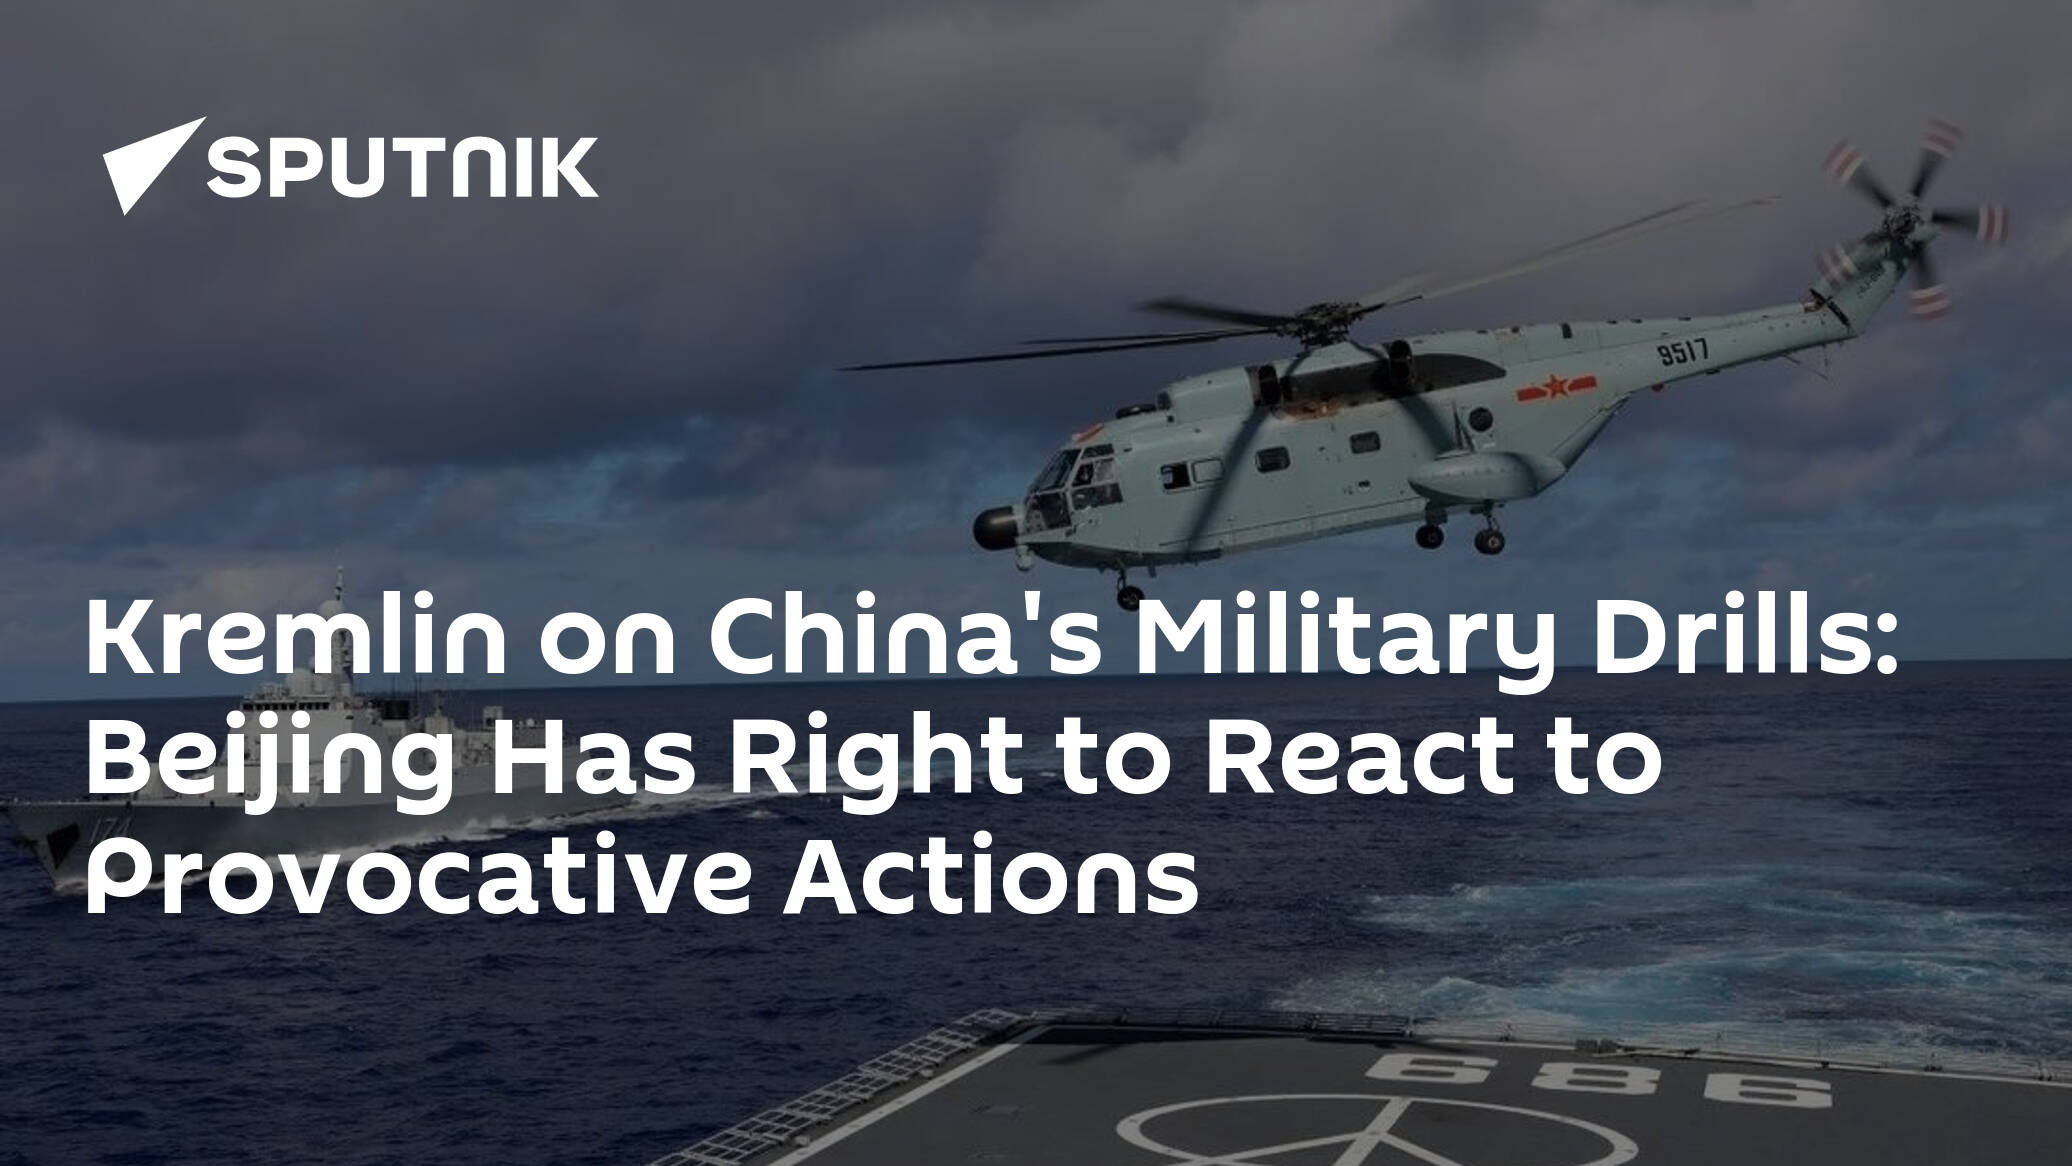 Kremlin on China's Military Drills: Beijing Has Right to React to Provocative Actions